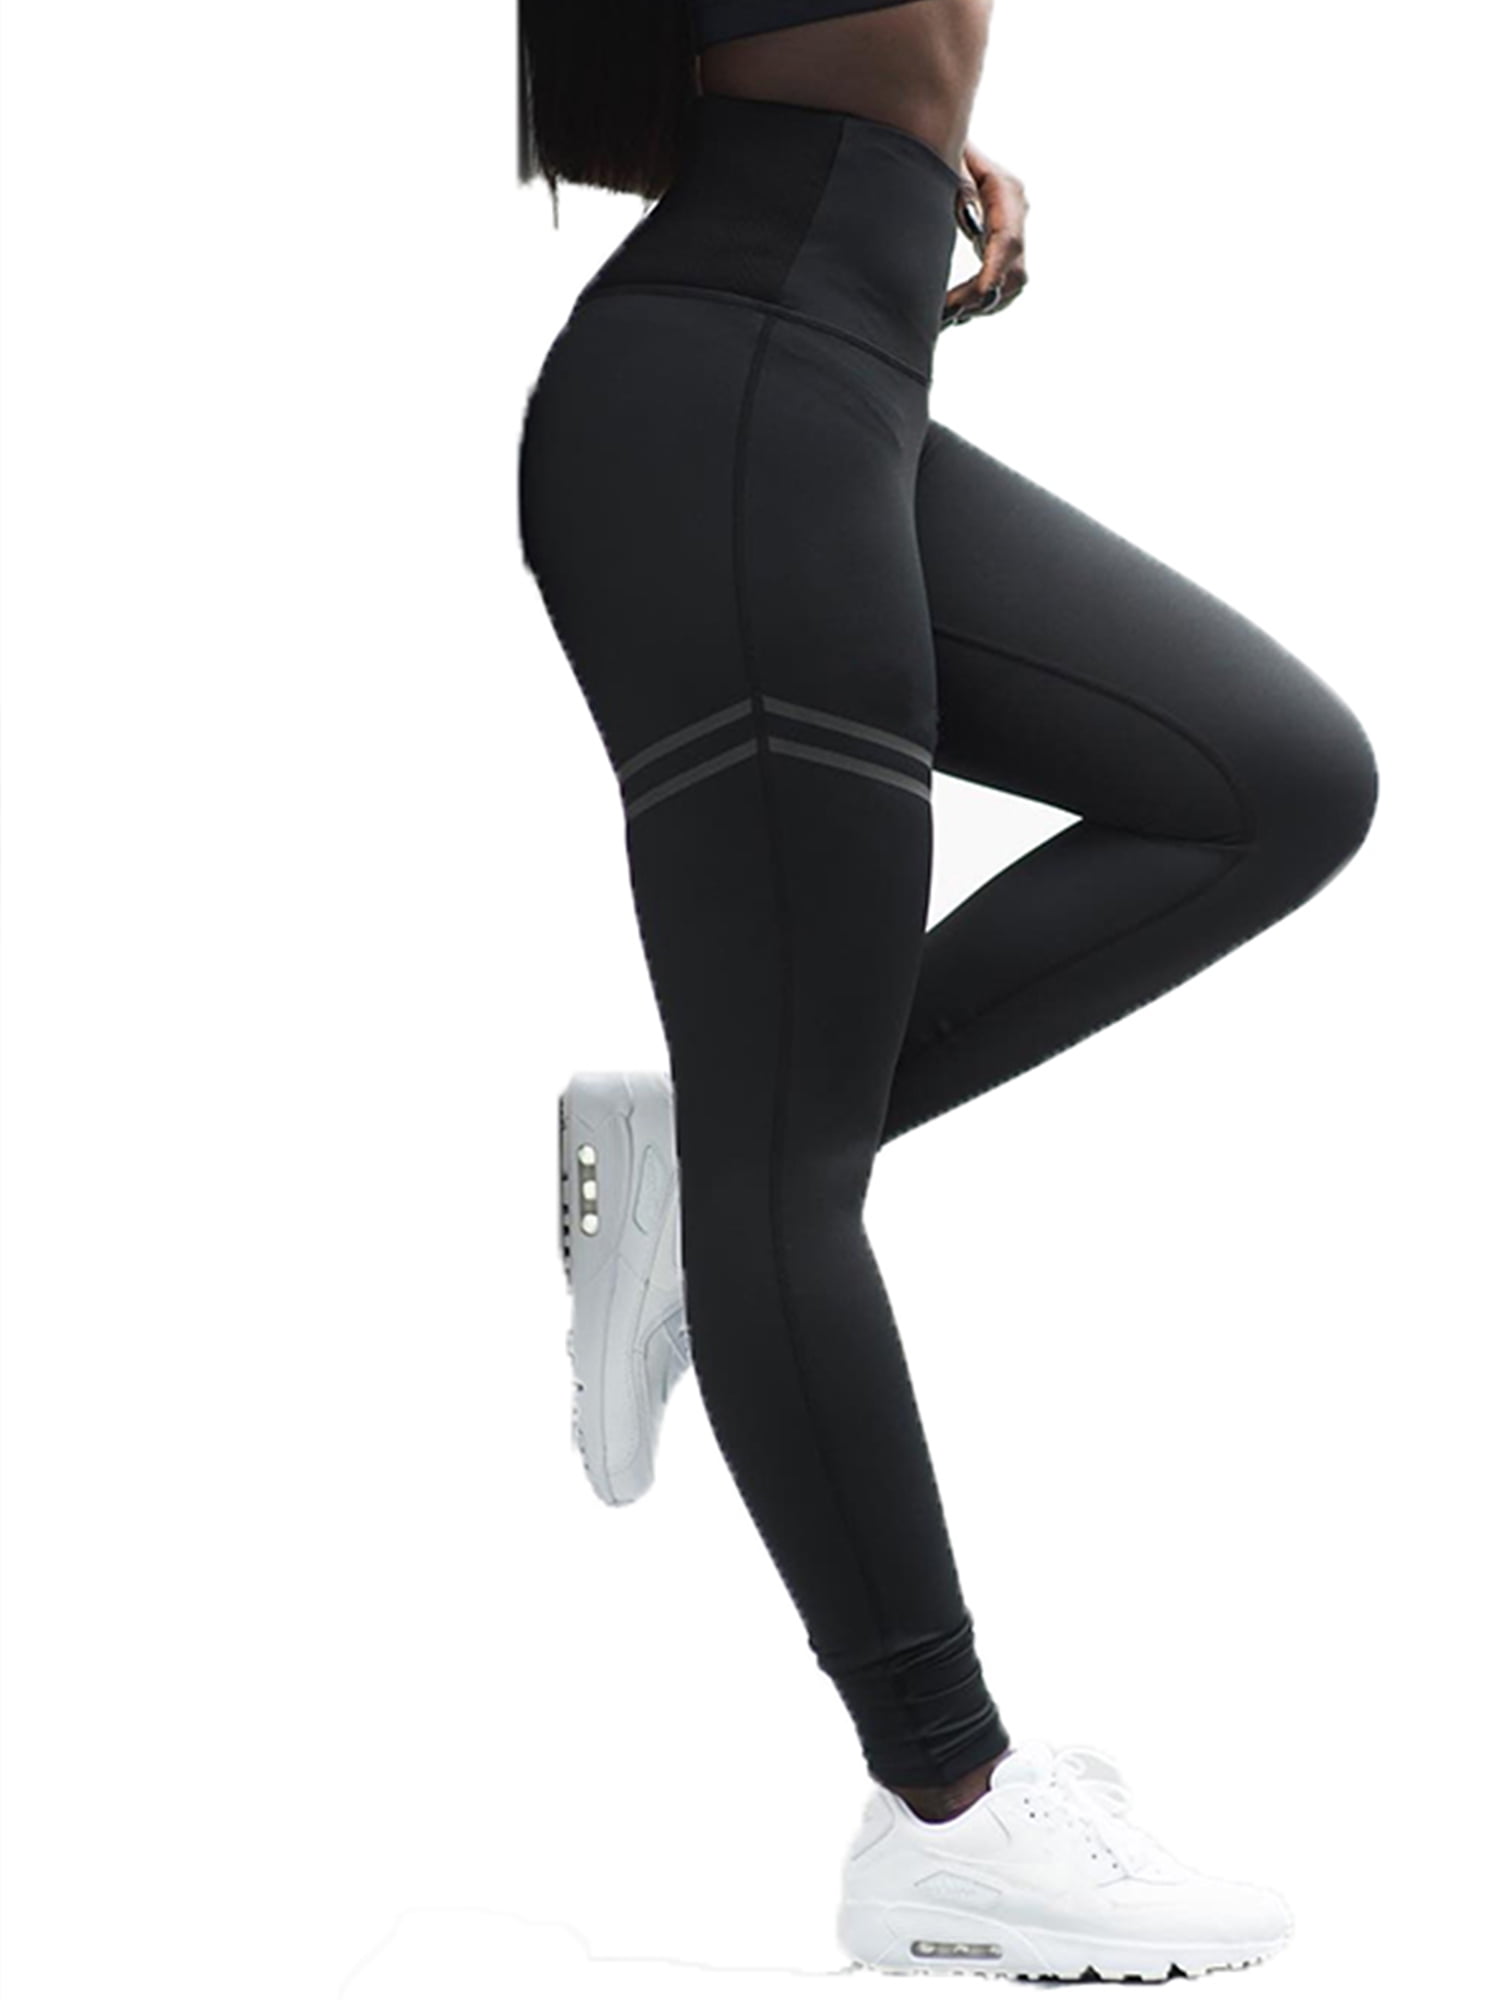 SMILICA Women Yoga Fitness Running Gym Stretch Sports Pants Trousers Leggings Pants 